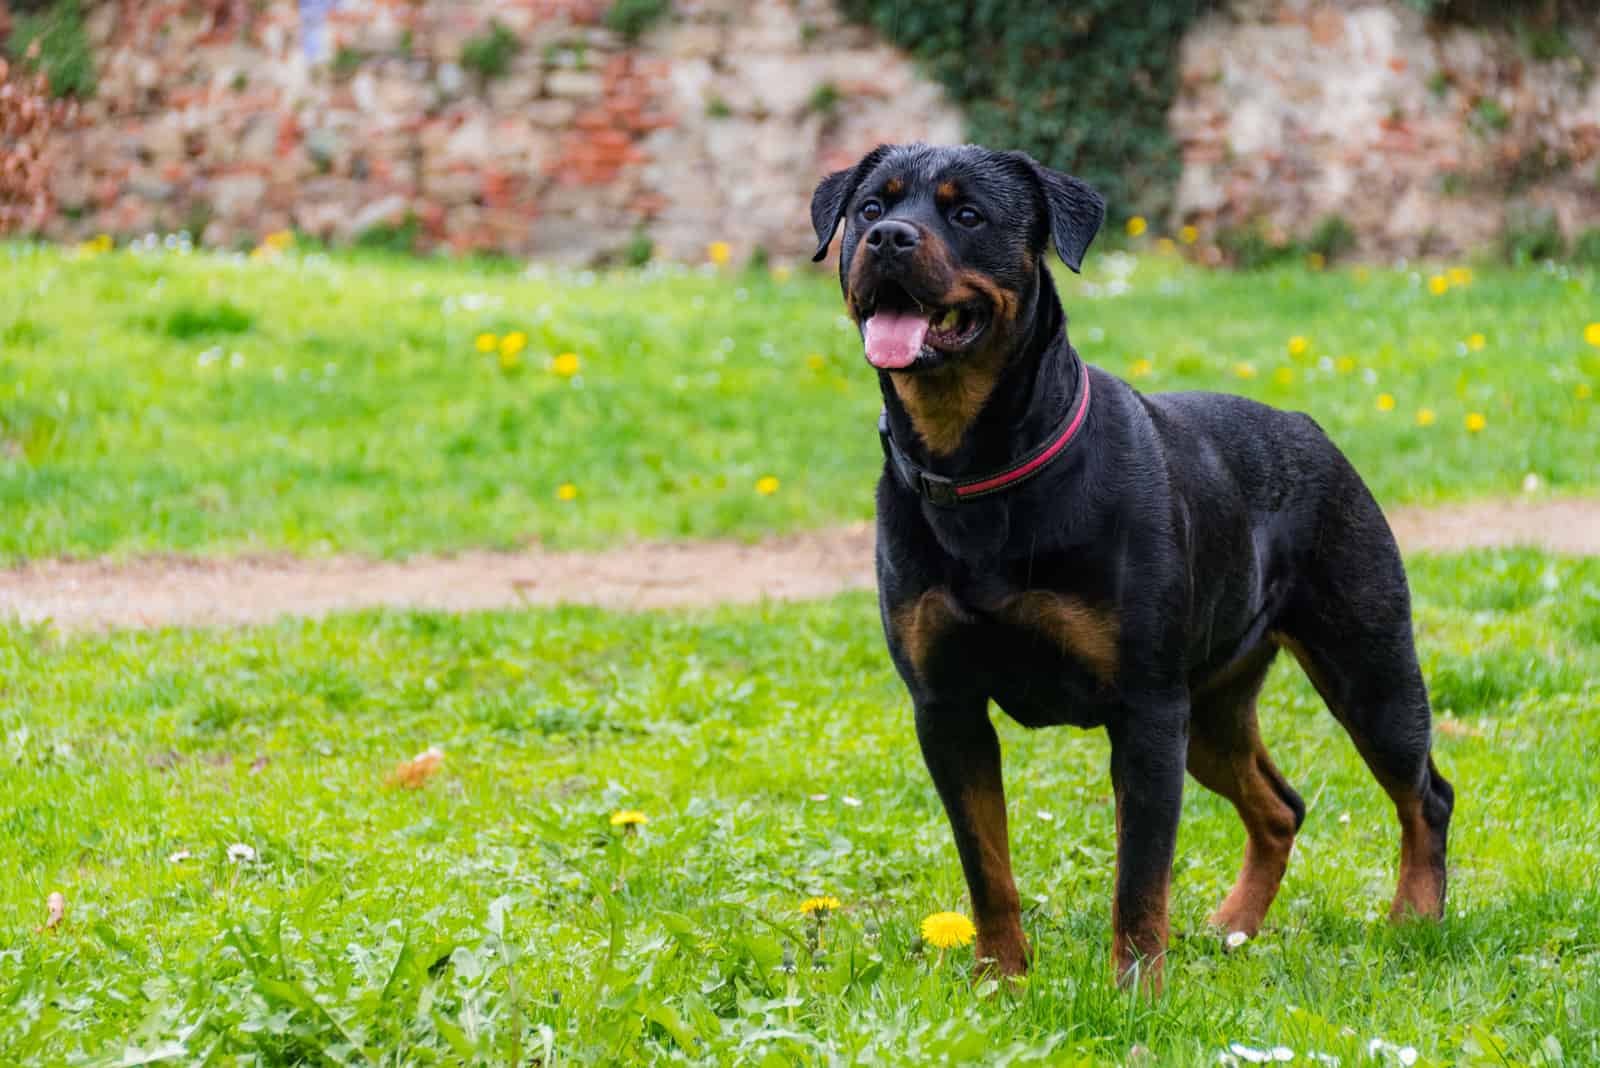 a cute Rottweiler is looking at something curious in the park